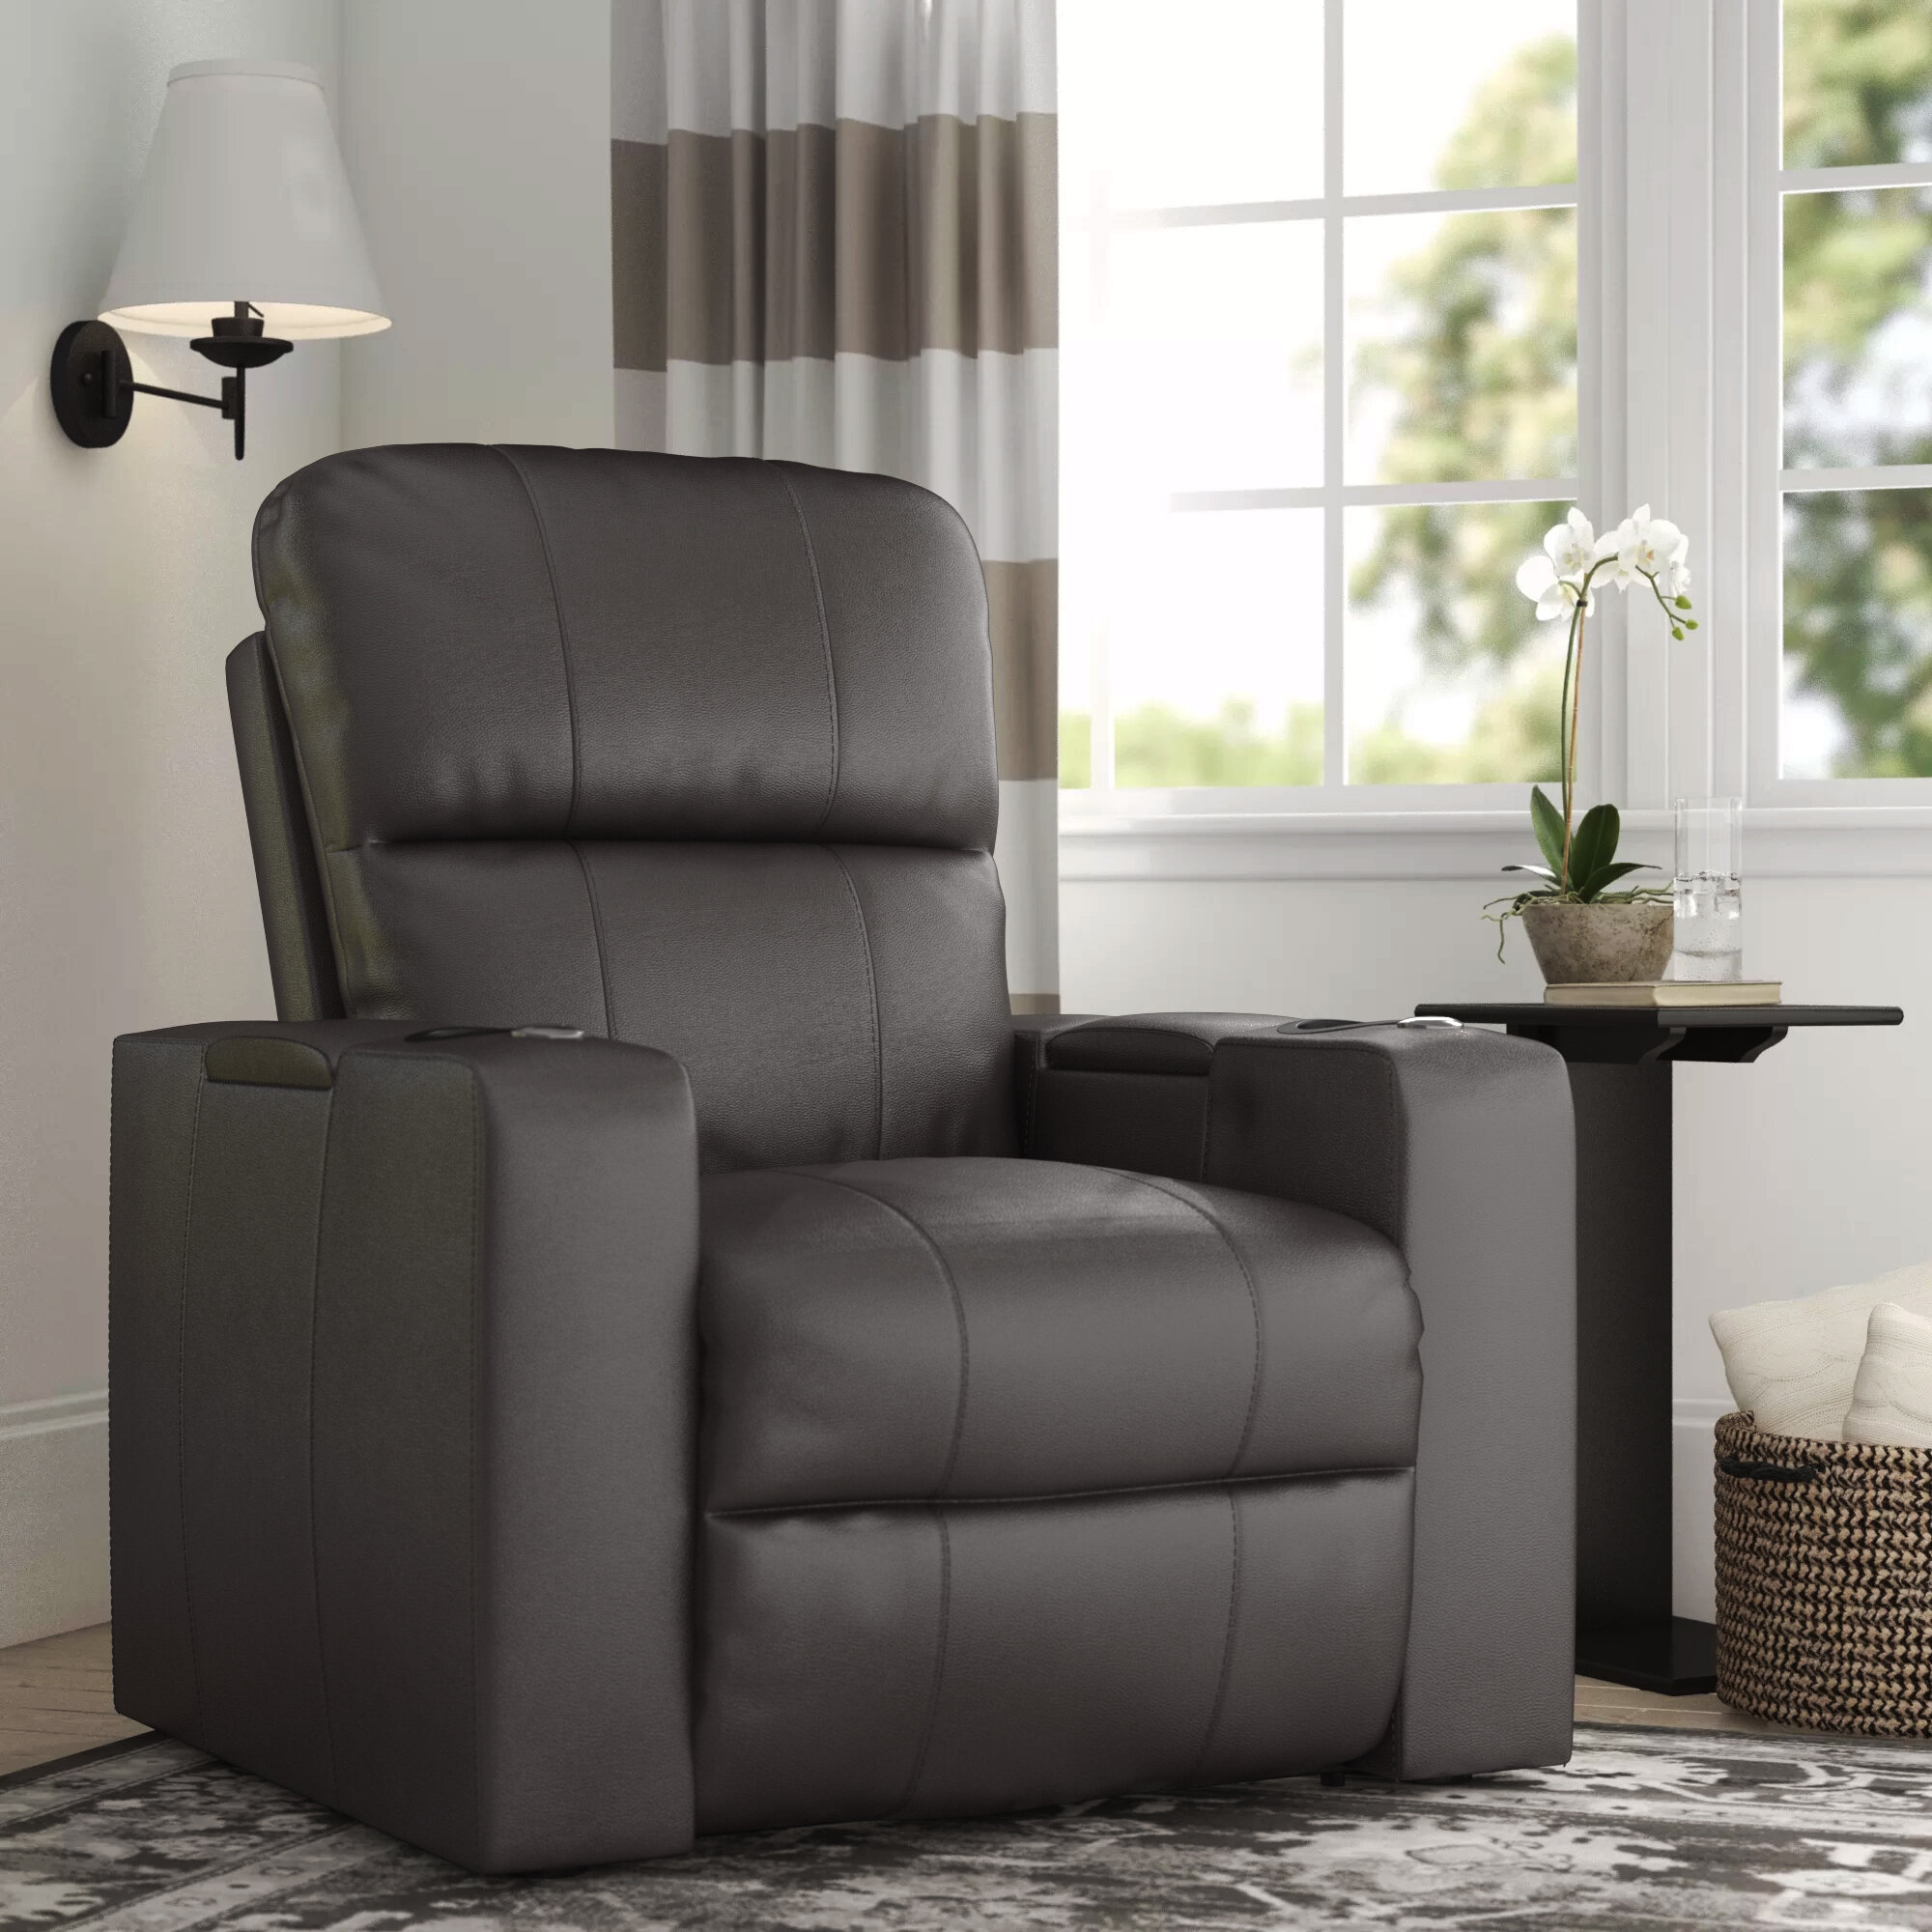 Staciee Faux Leather Power Home Theater Recliner